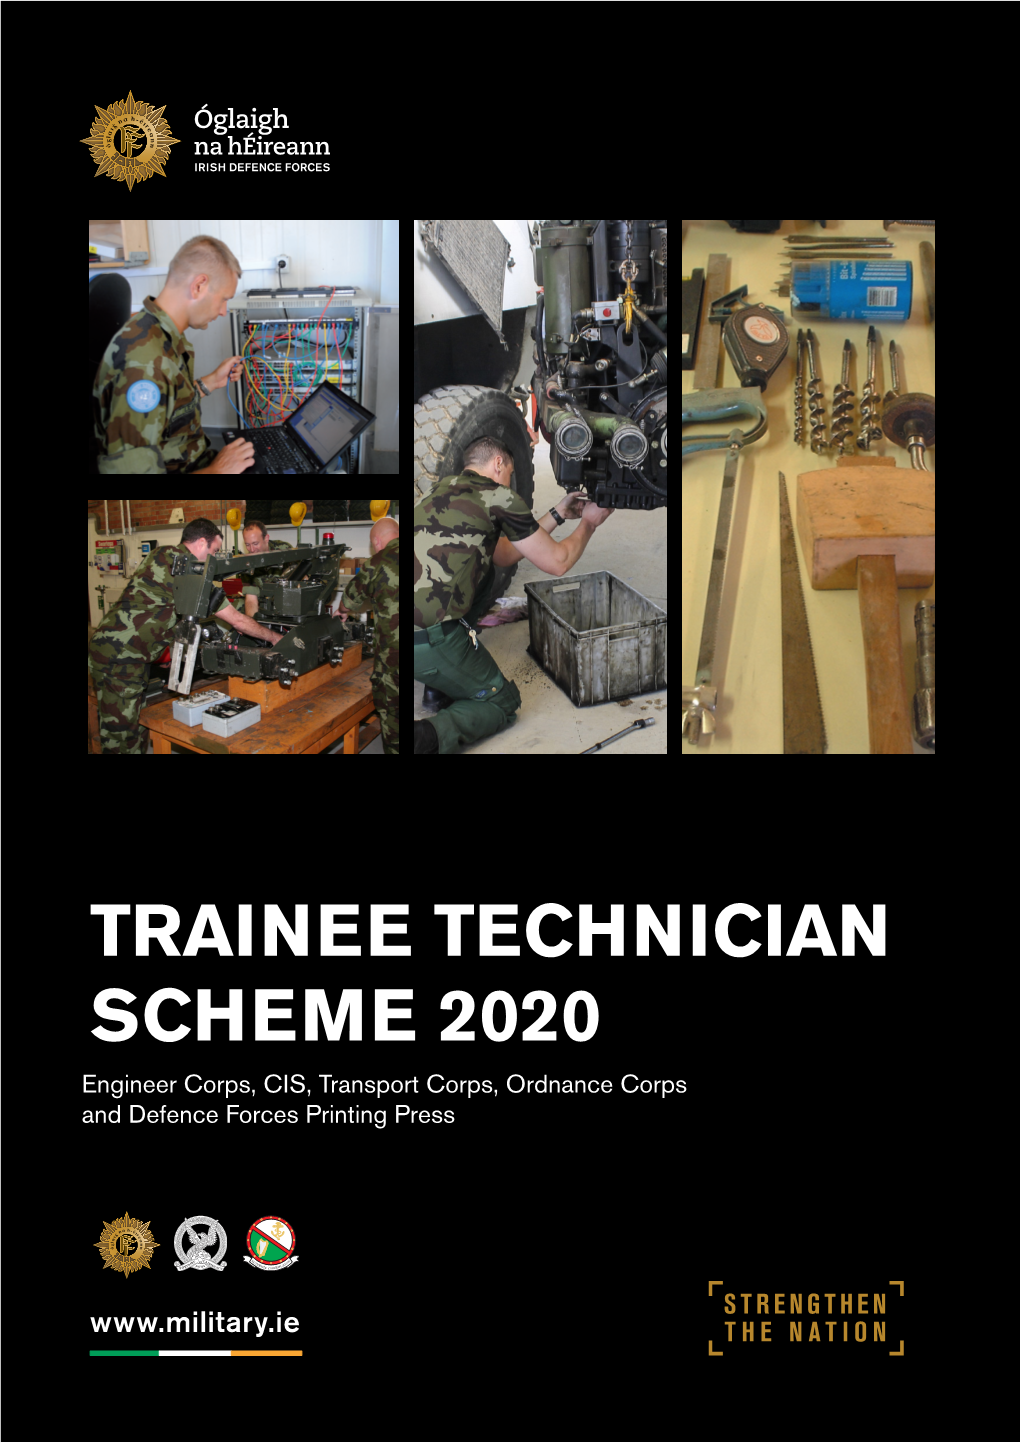 TRAINEE TECHNICIAN SCHEME 2020 Engineer Corps, CIS, Transport Corps, Ordnance Corps and Defence Forces Printing Press DEFENCE FORCES TECHNICIAN SCHEME